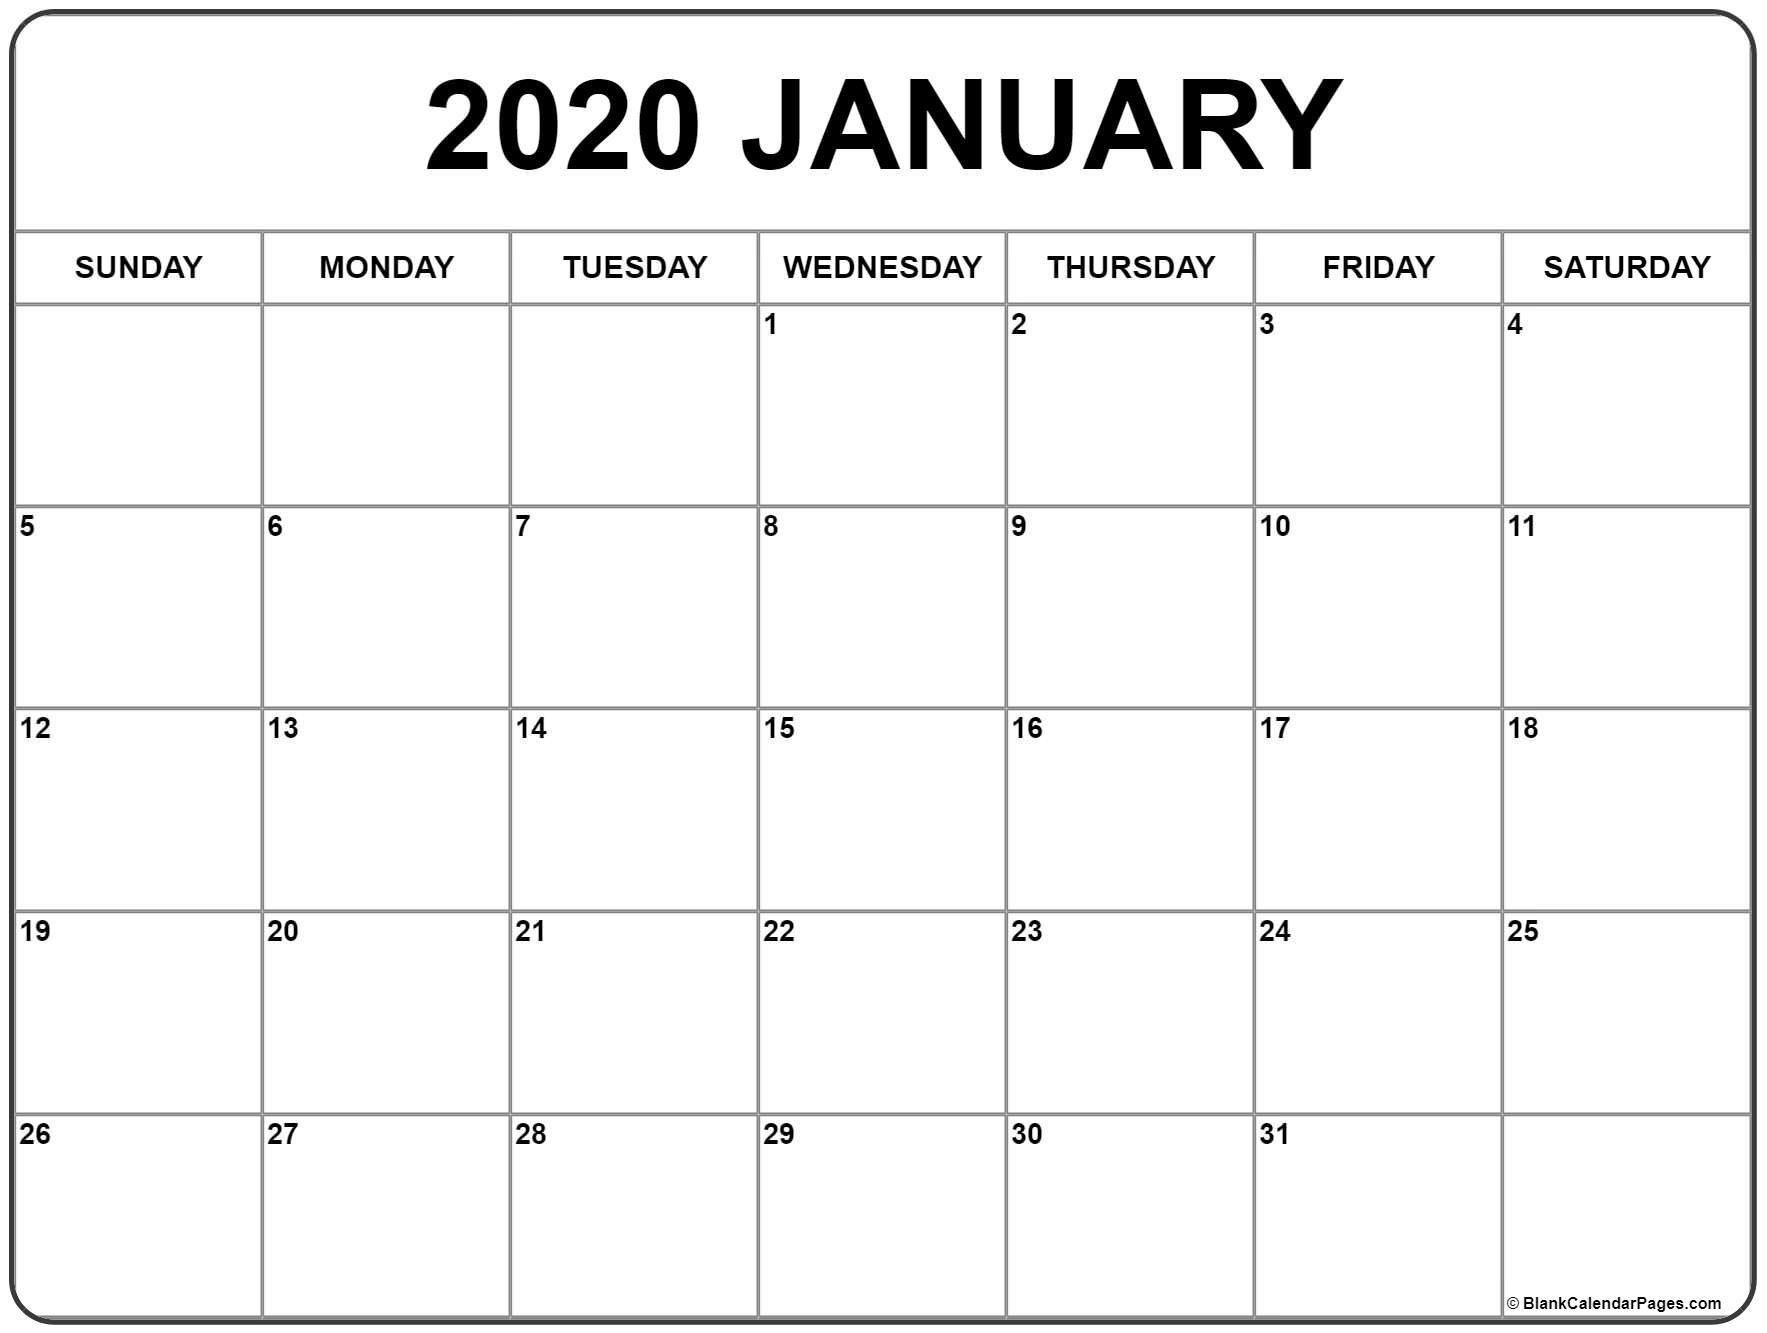 January 2020 Calendar | Free Printable Monthly Calendars-Blank Calendar 2020 To Fill In